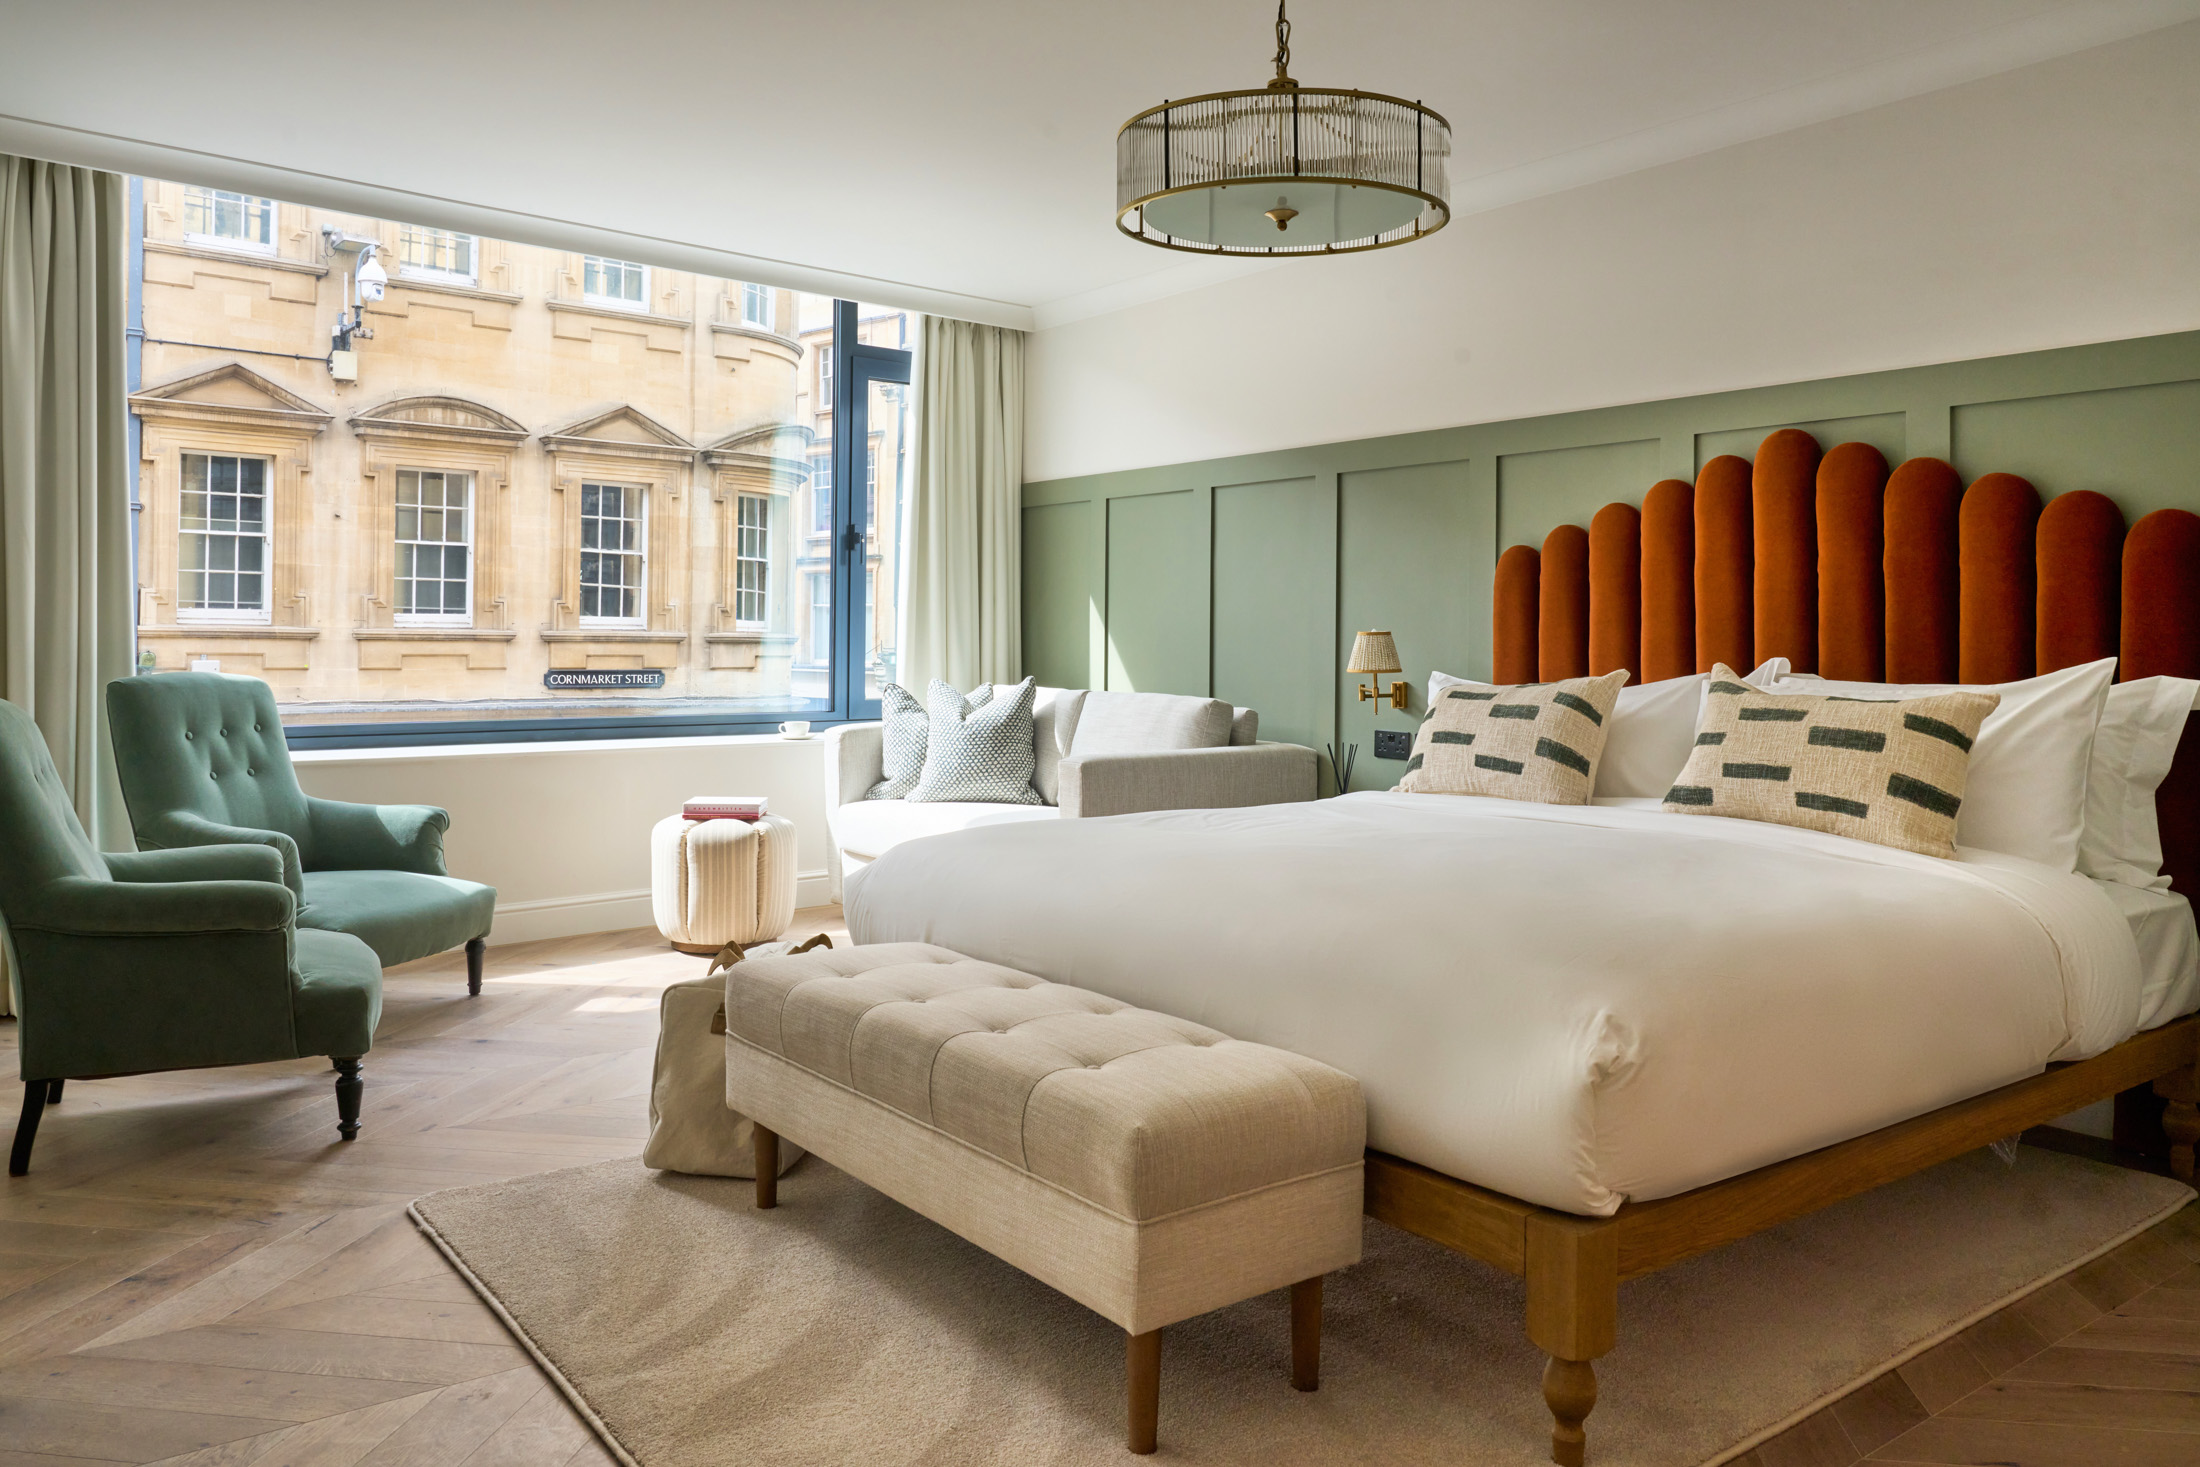 A stylish bedroom at the Store in Oxford, a quick walk from the city’s train station.